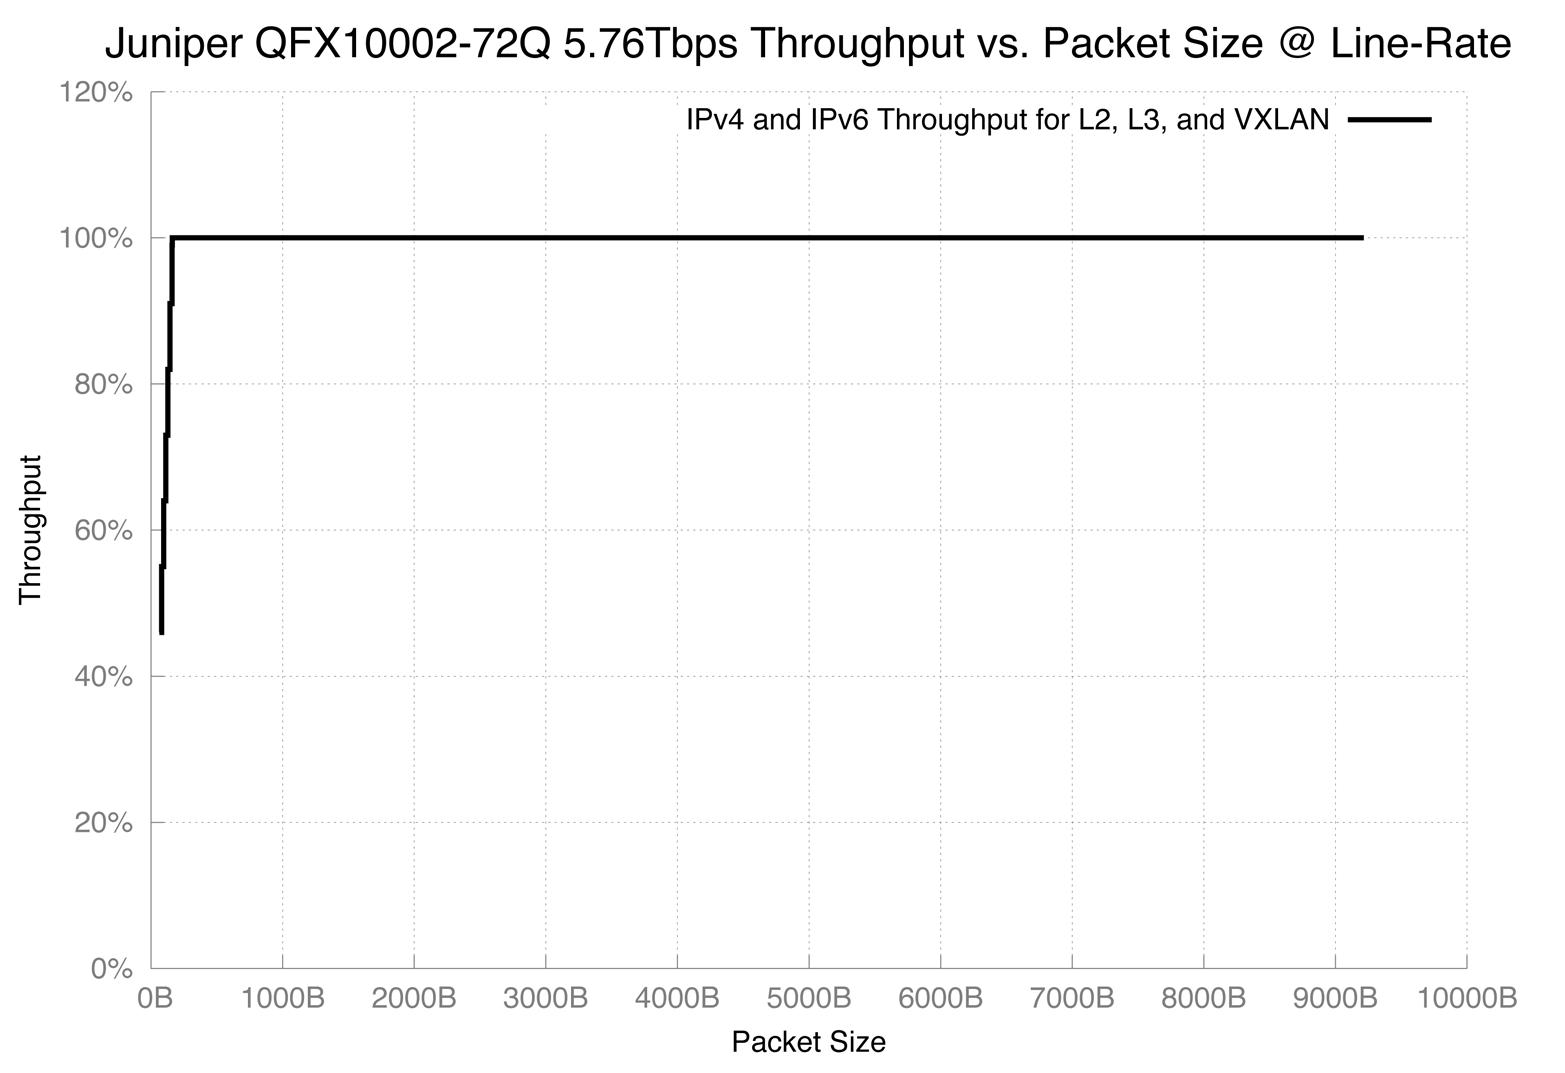 Graph showing Juniper QFX10002-72Q throughput versus packet size, tested at 5,760Gbps